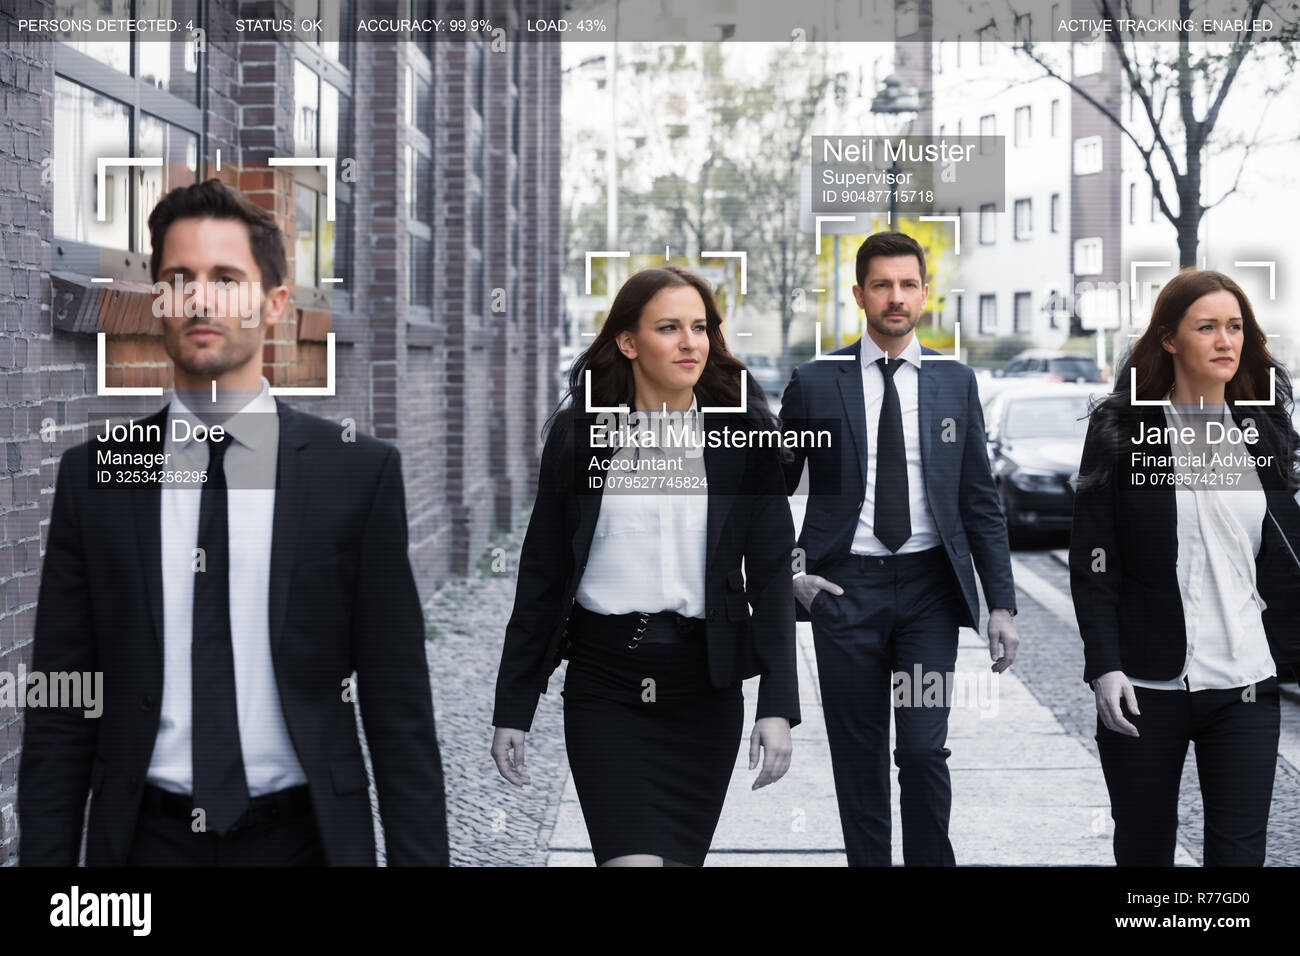 Businesspeople Face Recognized With Intellectual Learning System Stock Photo